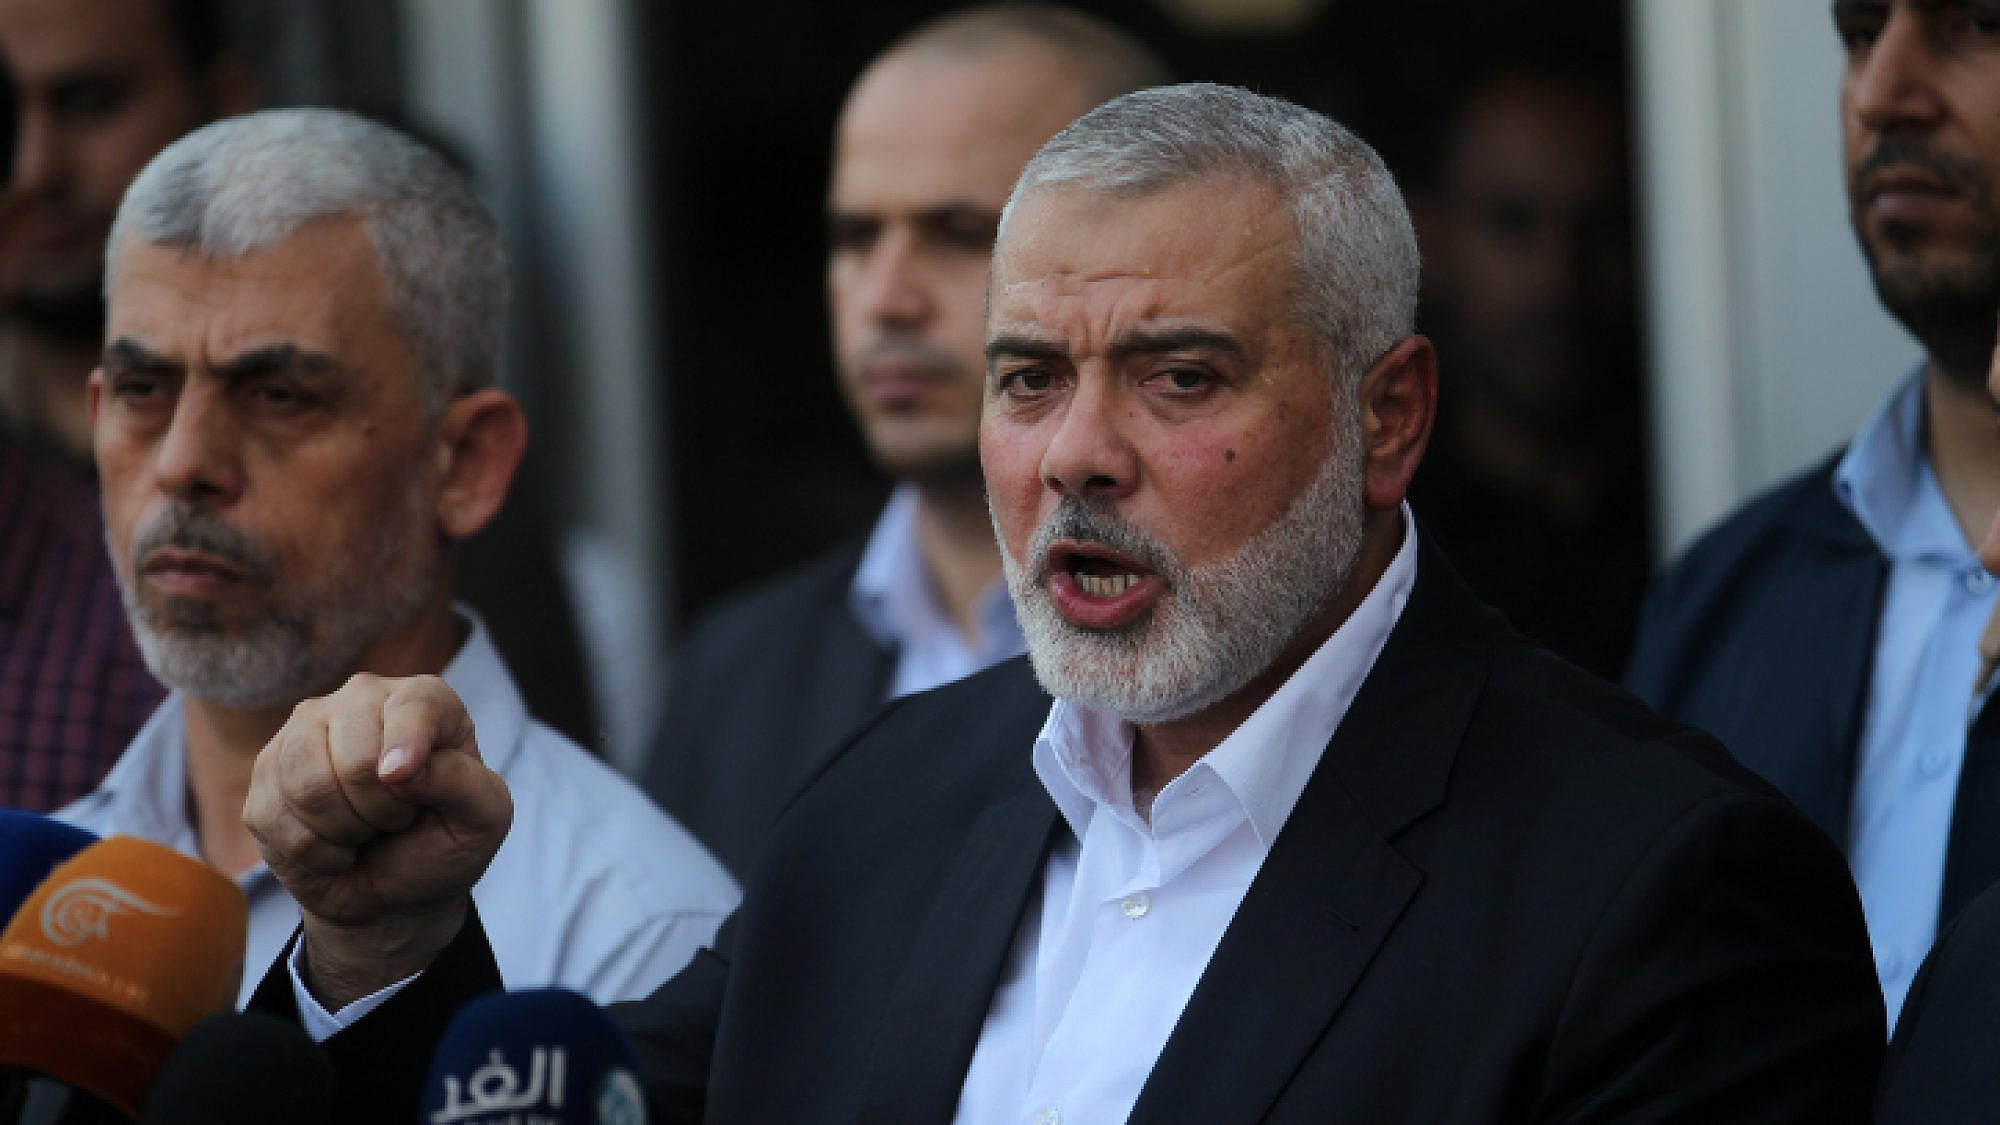 Hamas chief Ismail Haniyeh (right) and leader in Gaza Yahya Sinwar speak to the press in the southern Strip, Sept. 19, 2017. Photo by Abed Rahim Khatib/Flash90.